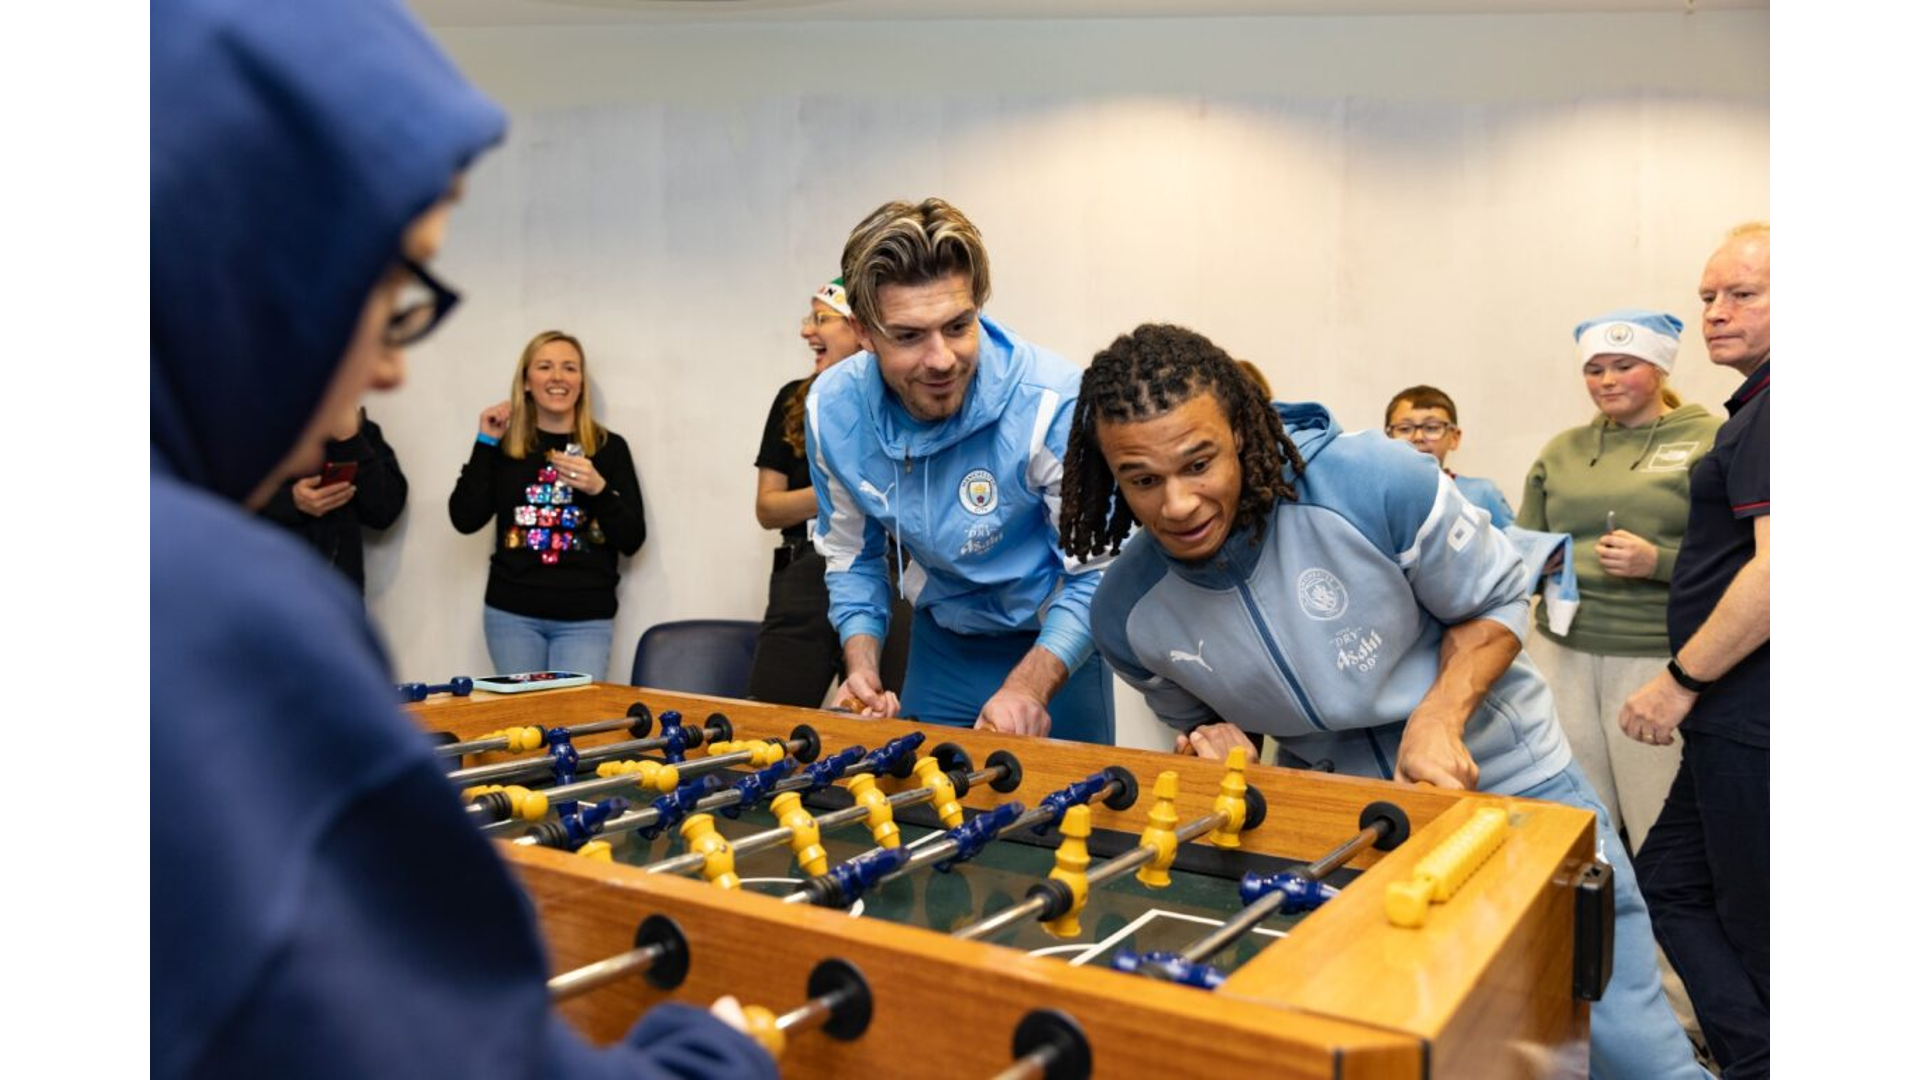 TABLE TOPPERS: Jack Grealish and Nathan Ake play table football with some of the young patients.